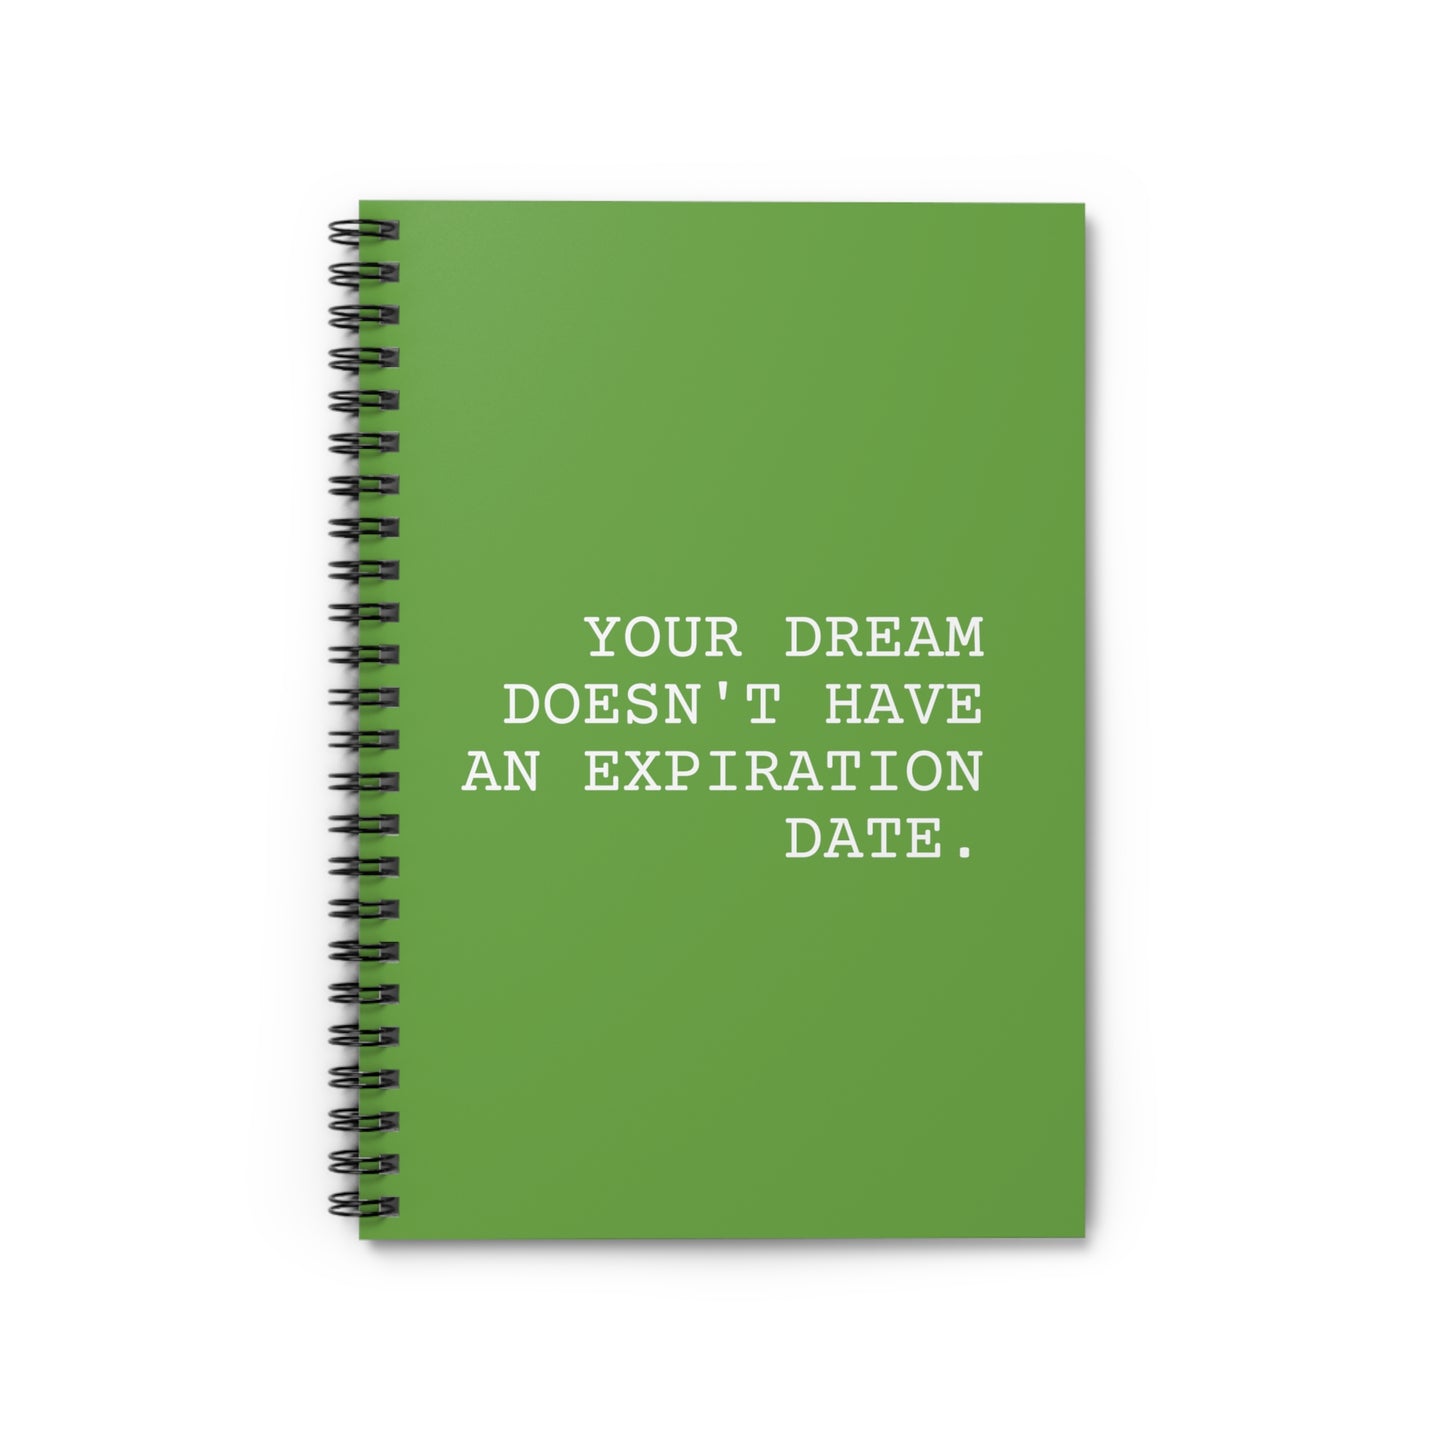 BRB, I Have To Journal Collection- Your Dream Spiral Notebook - Ruled Line